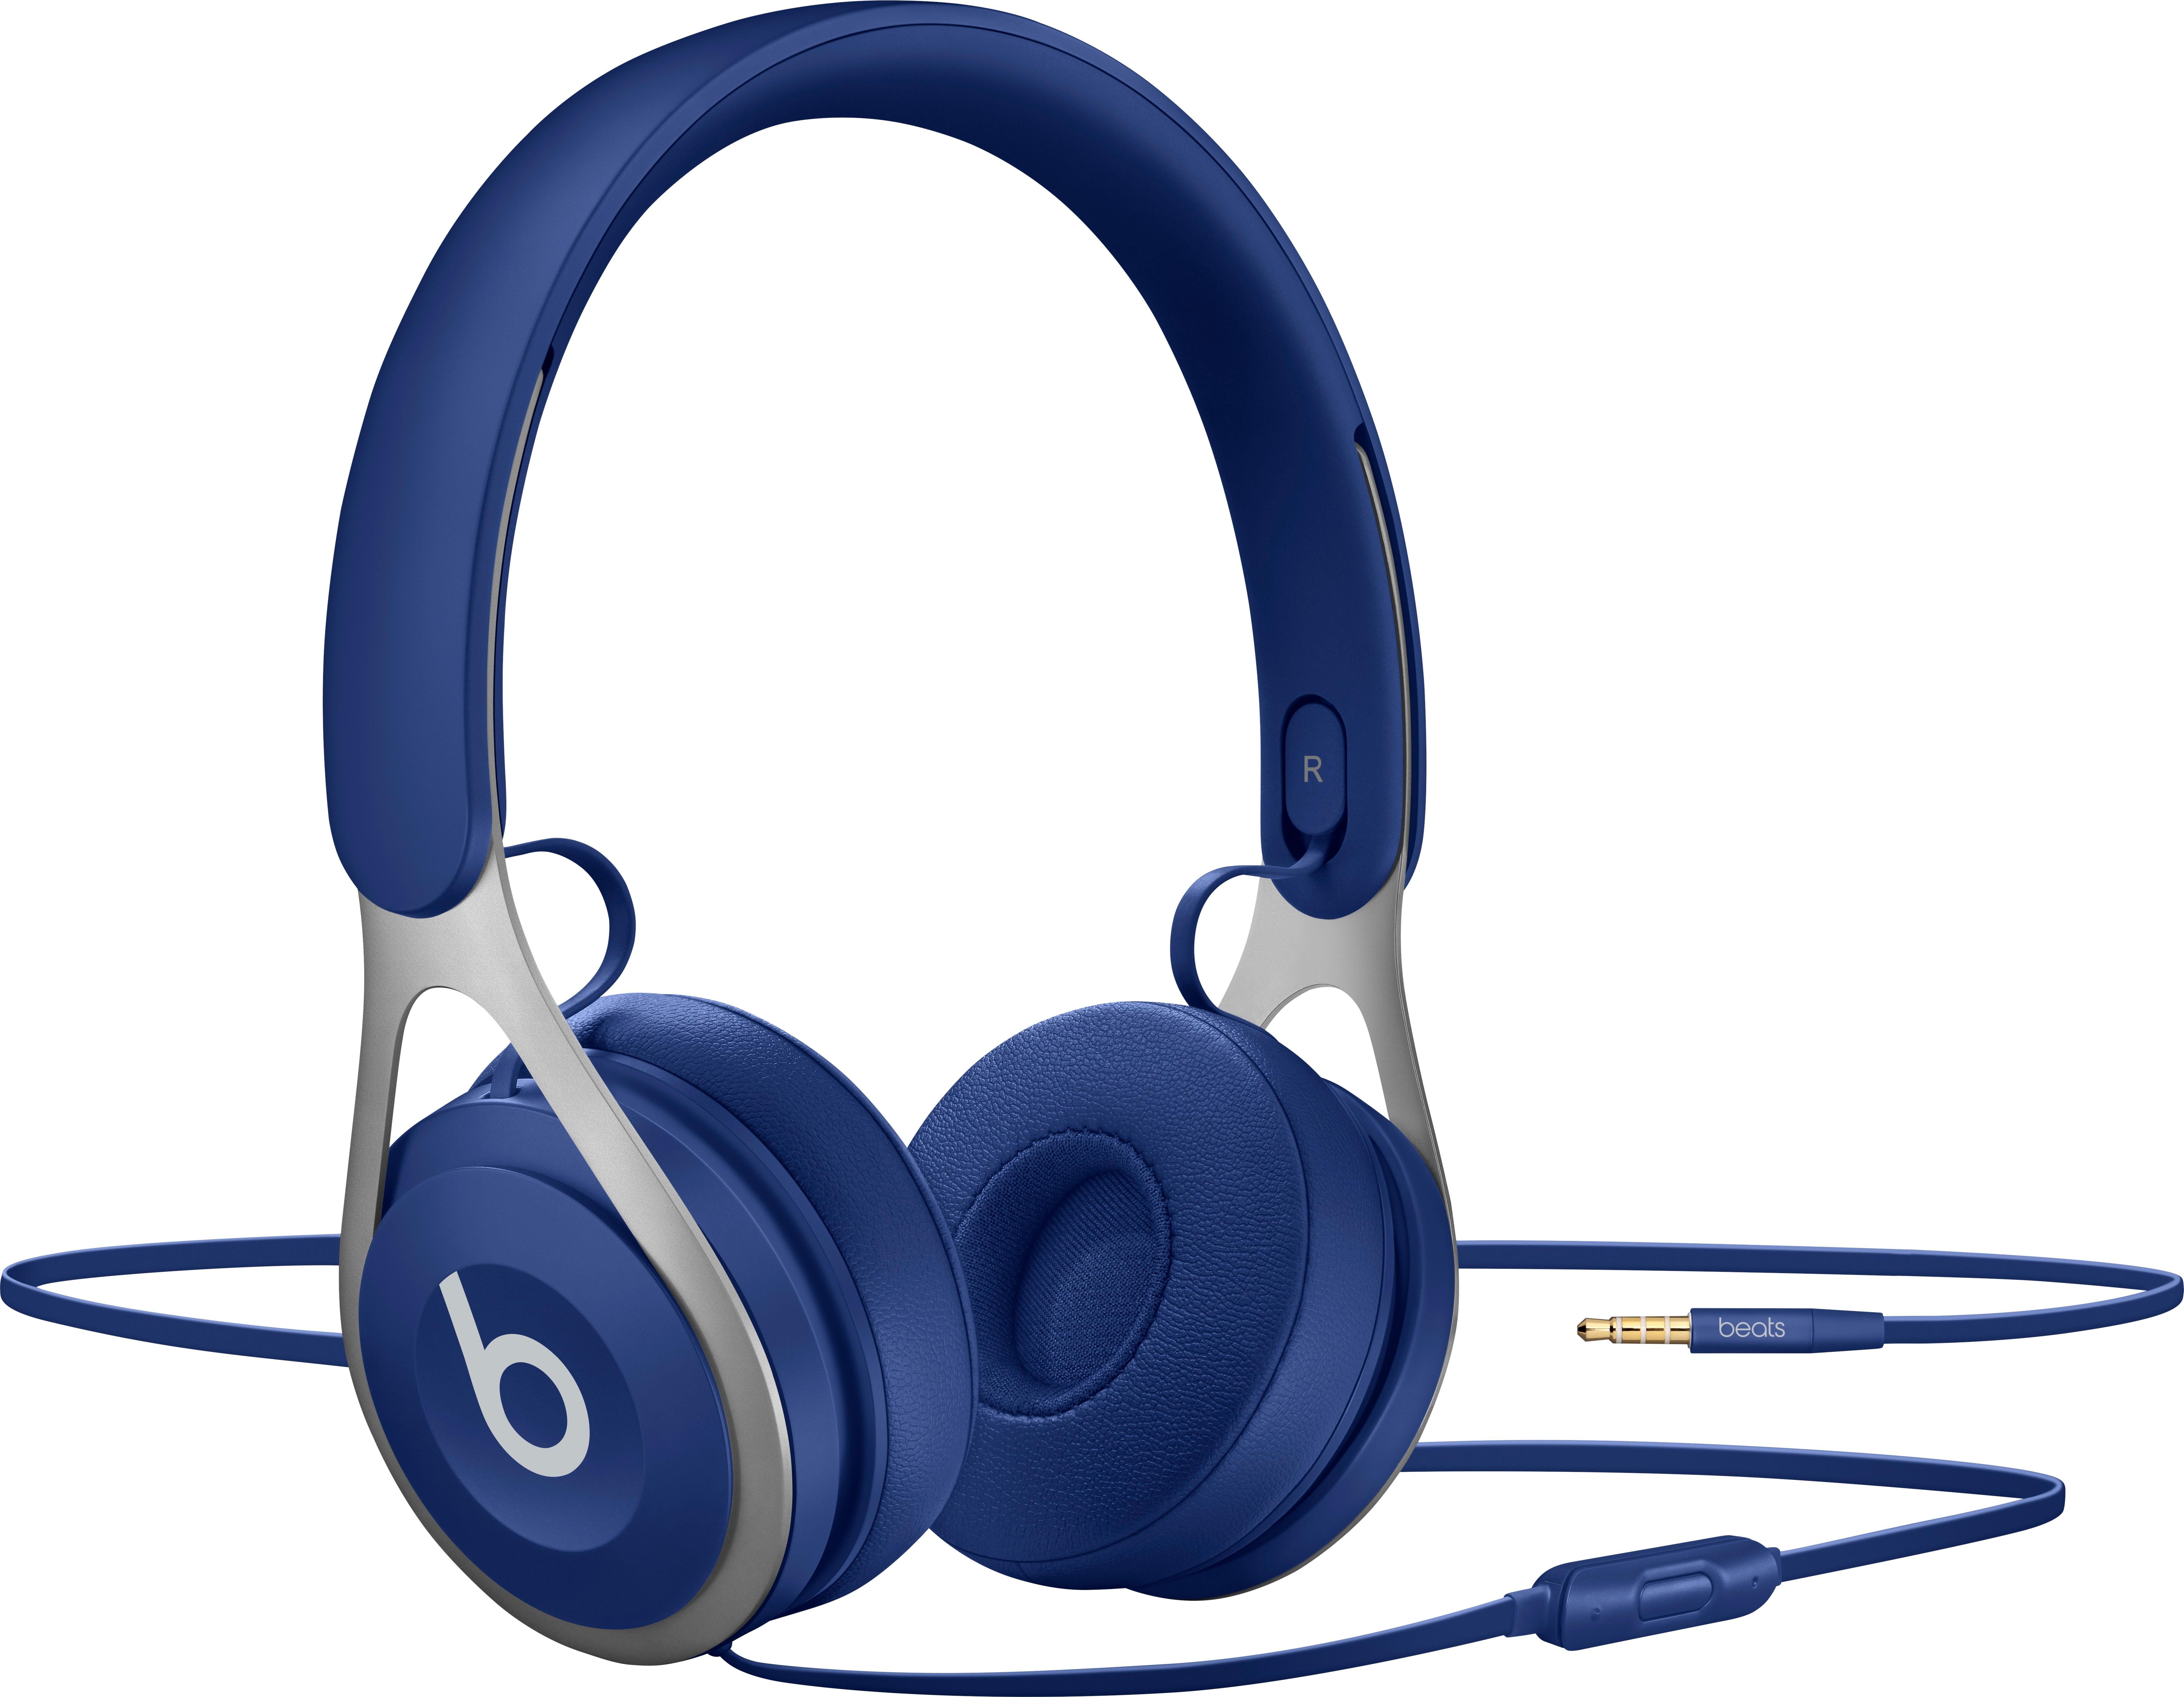 Angle View: Beats by Dr. Dre - Geek Squad Certified Refurbished Beats EP Headphones - Blue